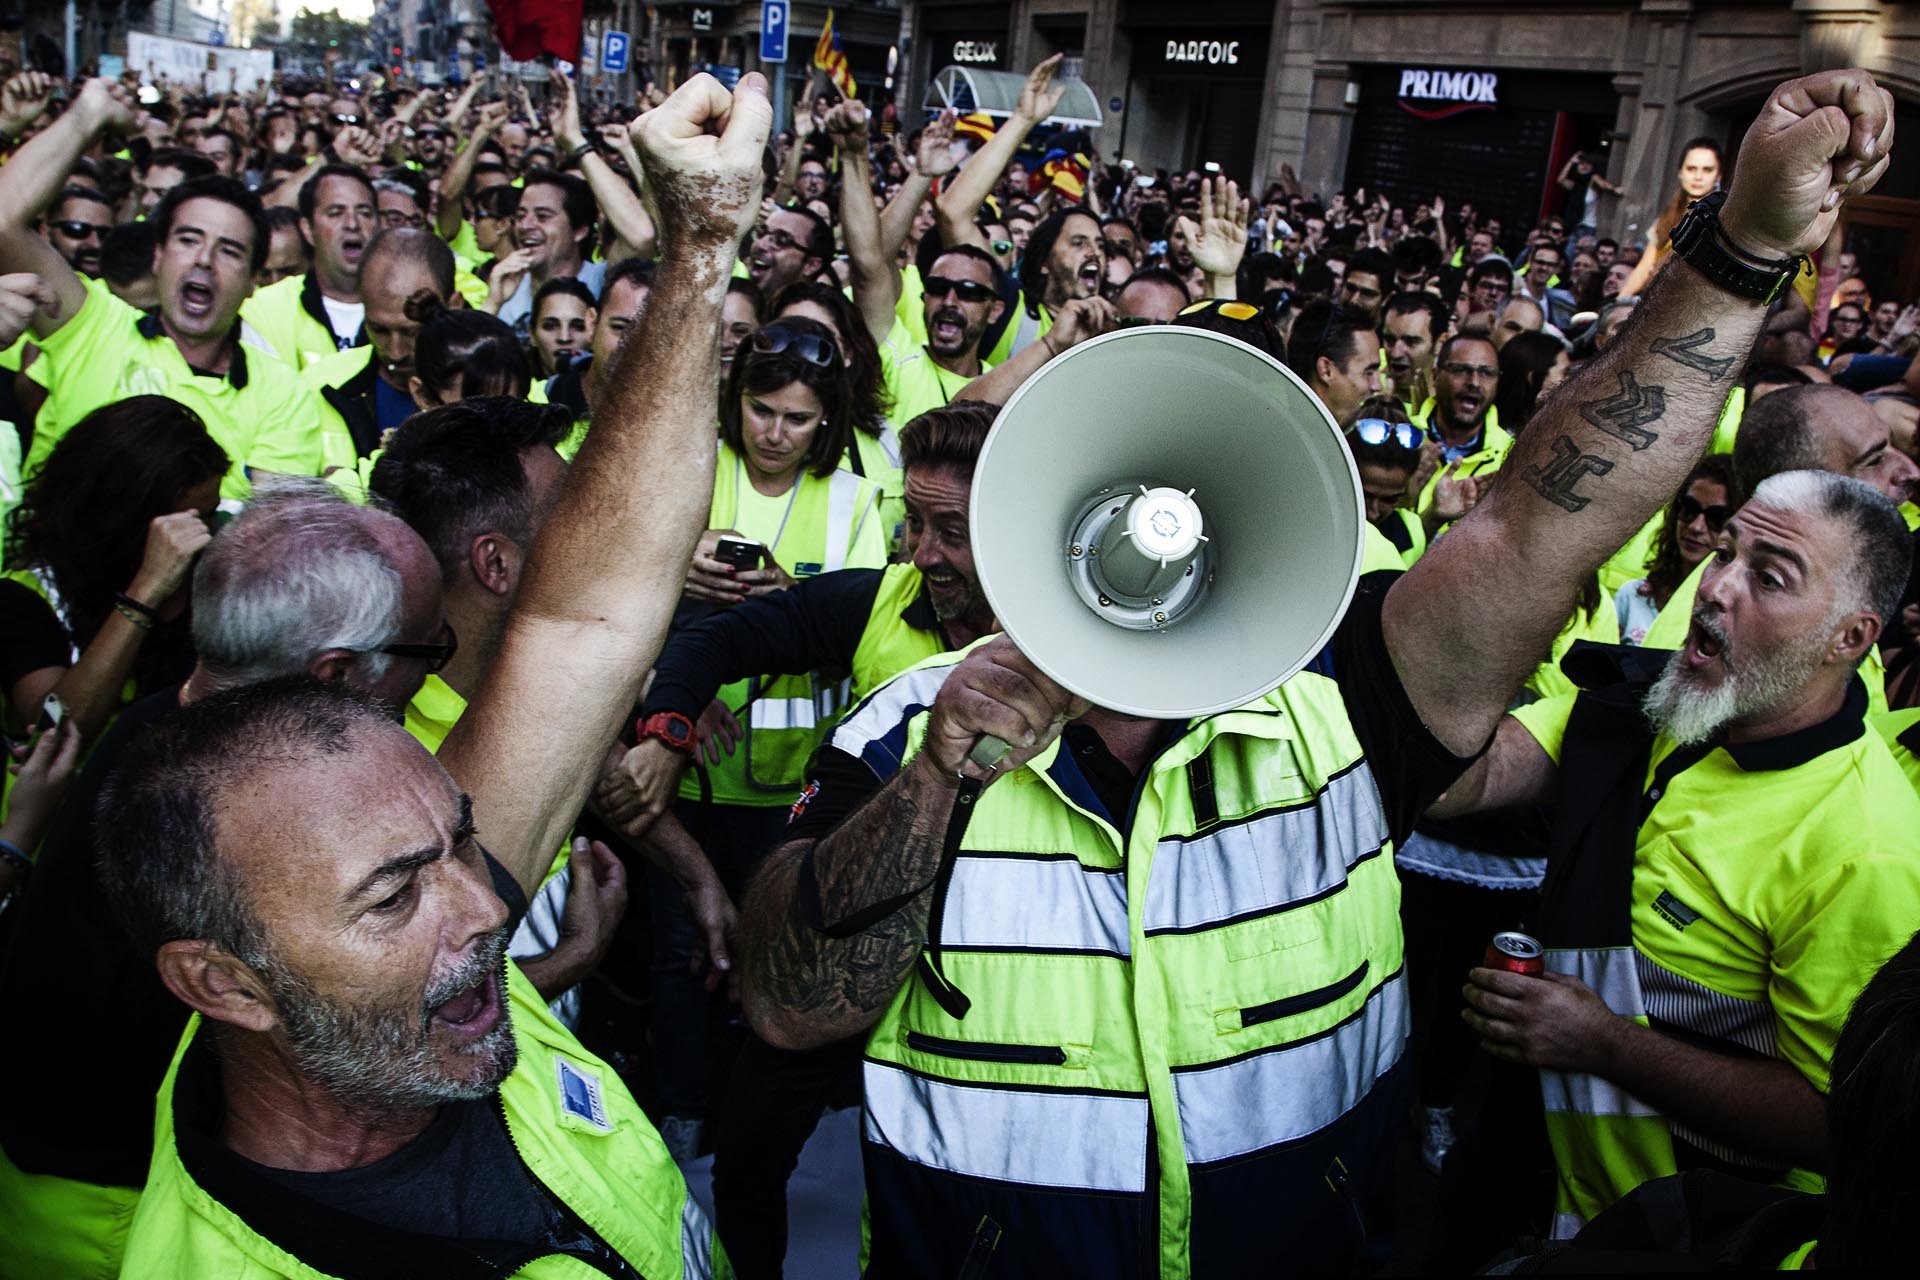 Protesters in a demonstration for the police brutality lived in the referendum of 1 October for the independence of Catalonia.